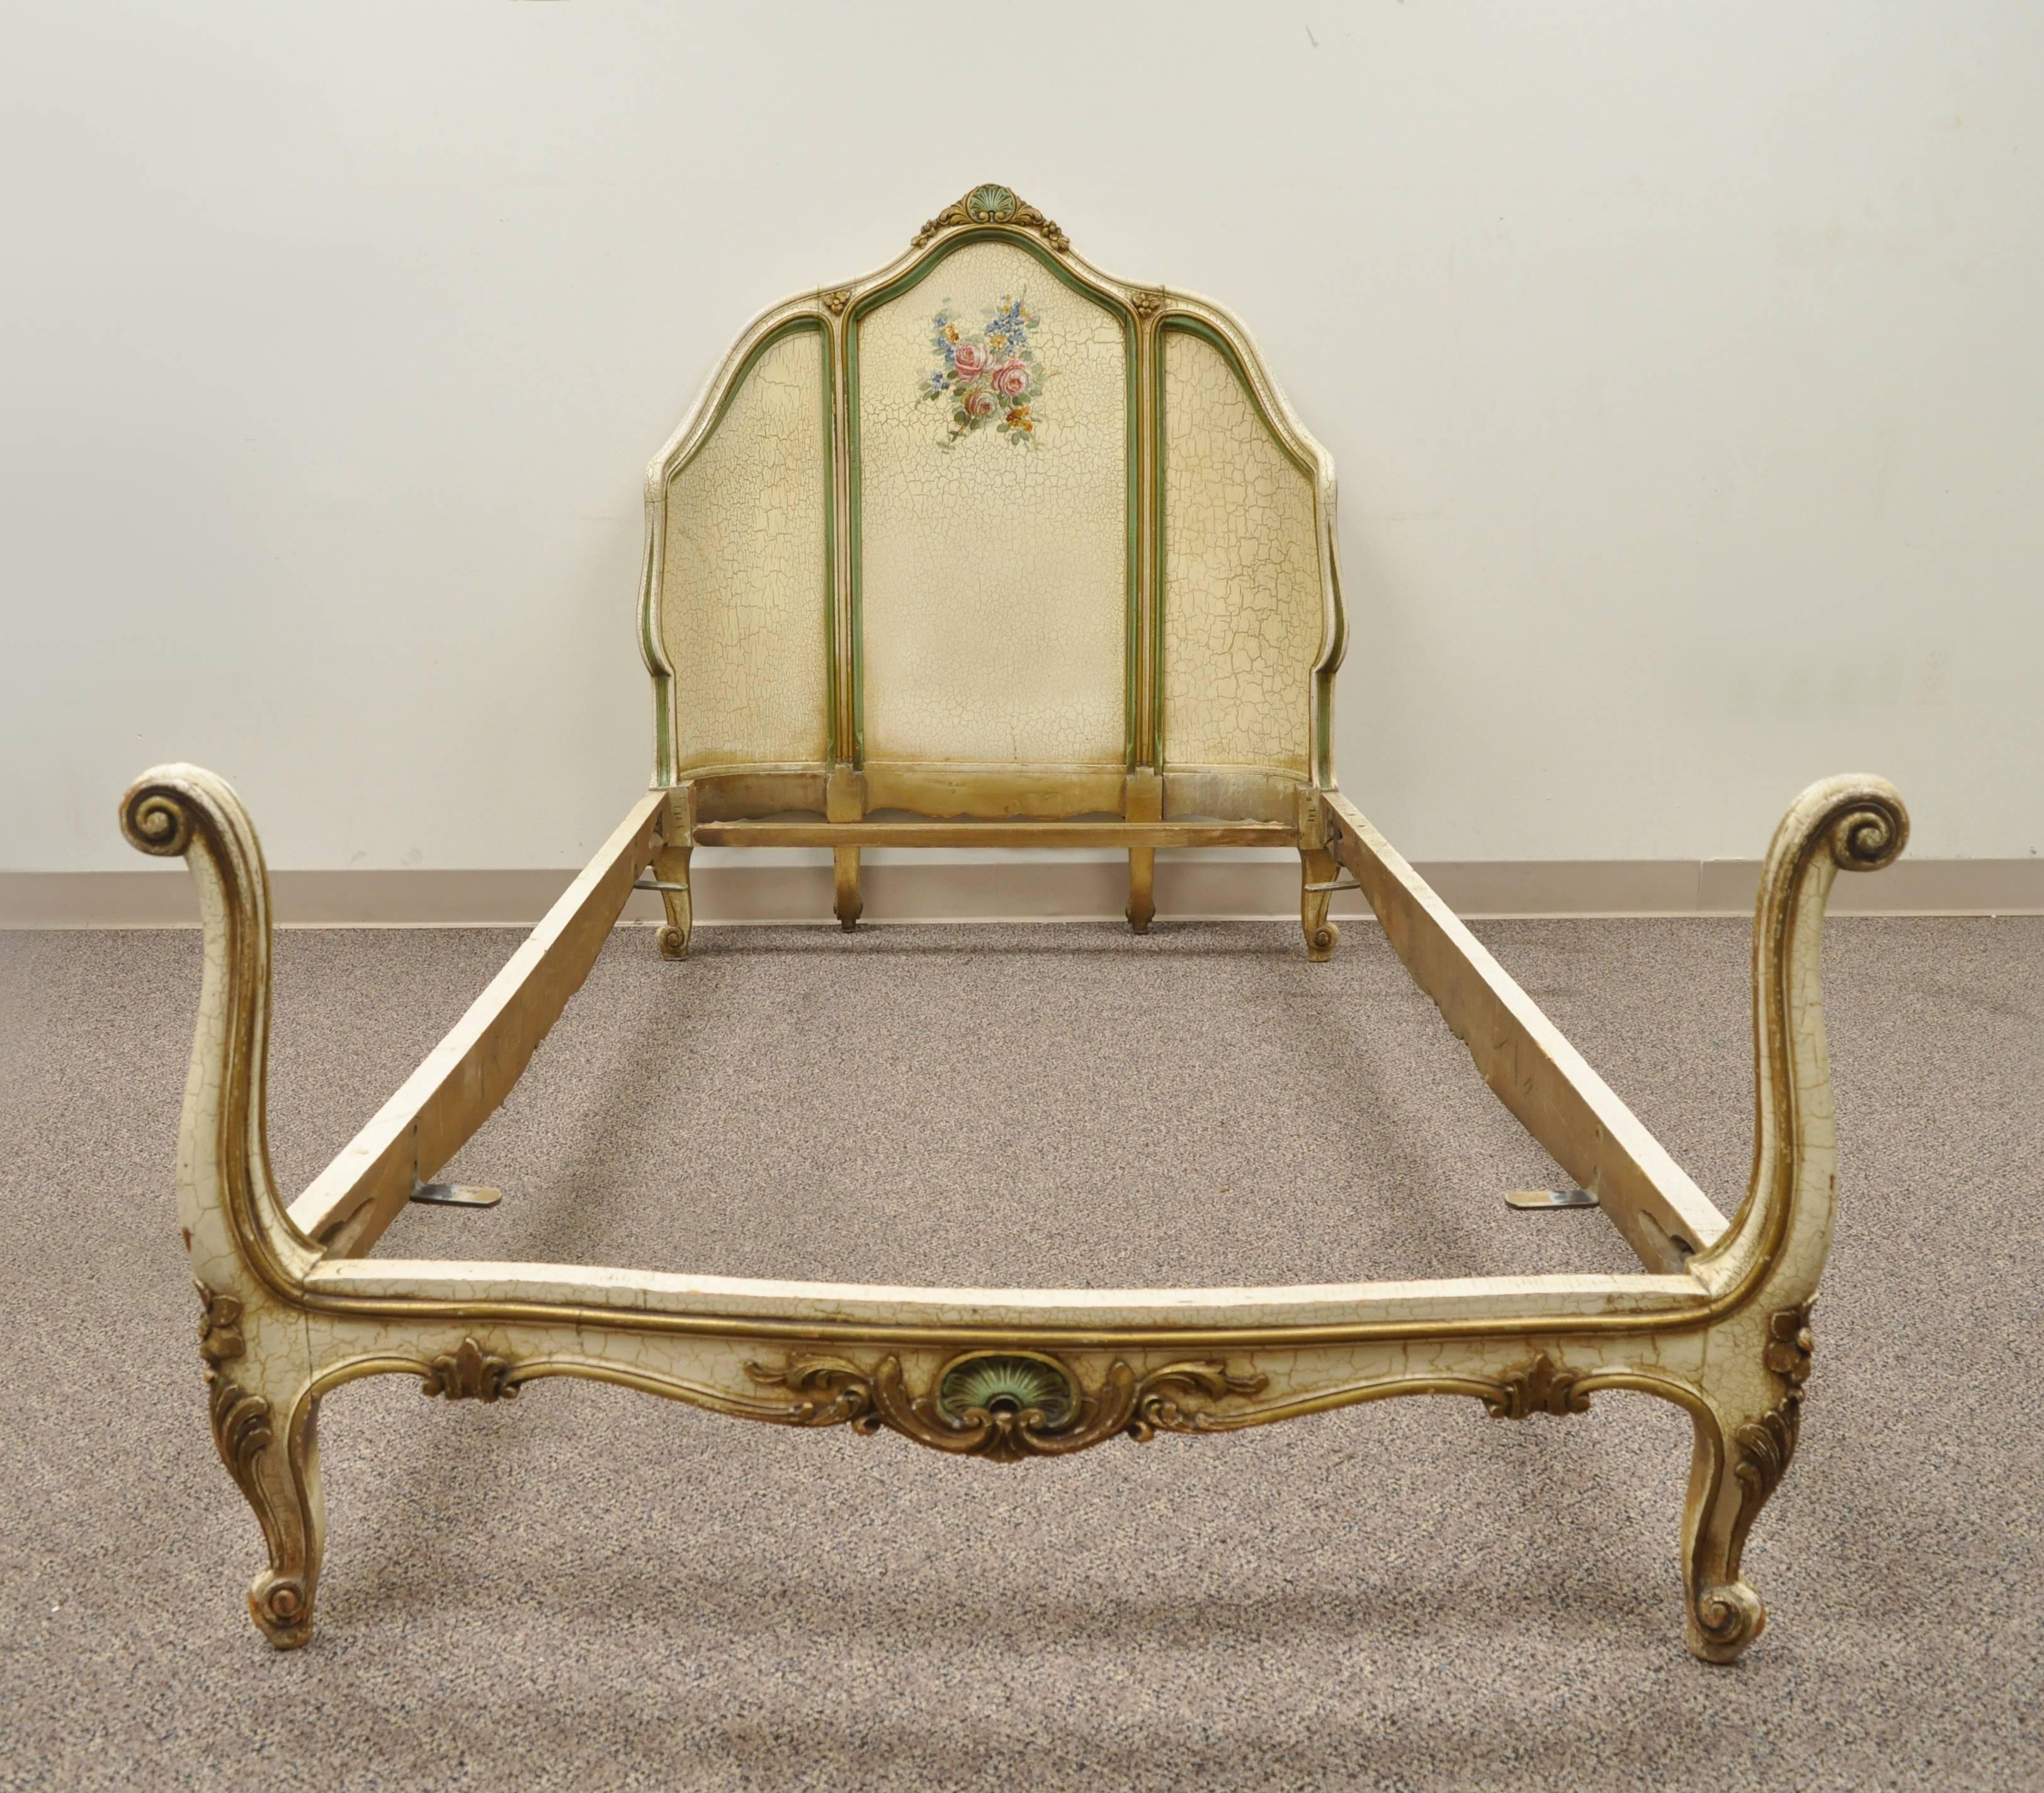 Early 20th Century Shell Carved French Louis XV Style Single/Twin Bed with Green & Cream Distress Painted Finish. Listing includes curved headboard, shell carved side rails, and shell carved footboard all with beautiful distress painted green and